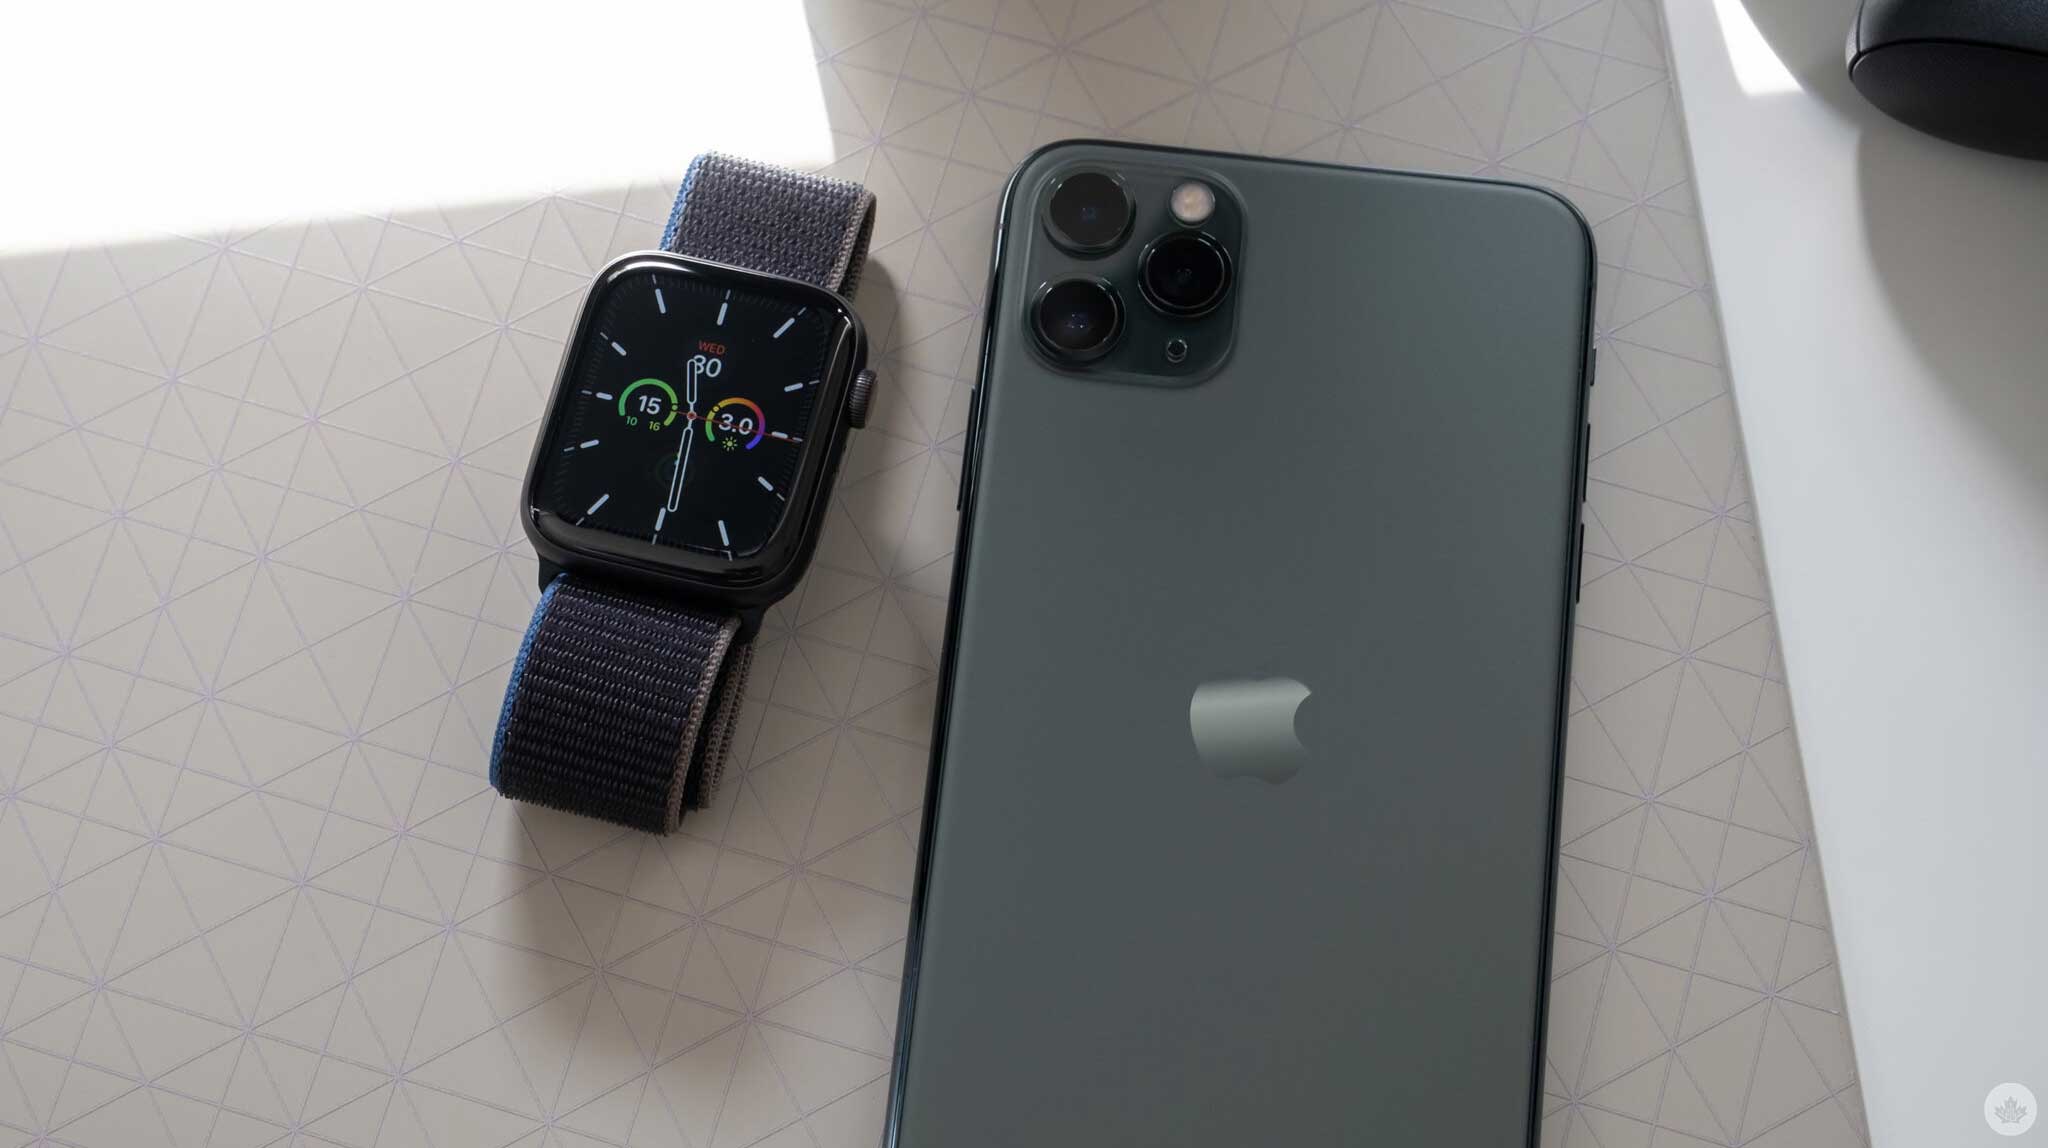 iOS 16 and WatchOS 9 are available for download